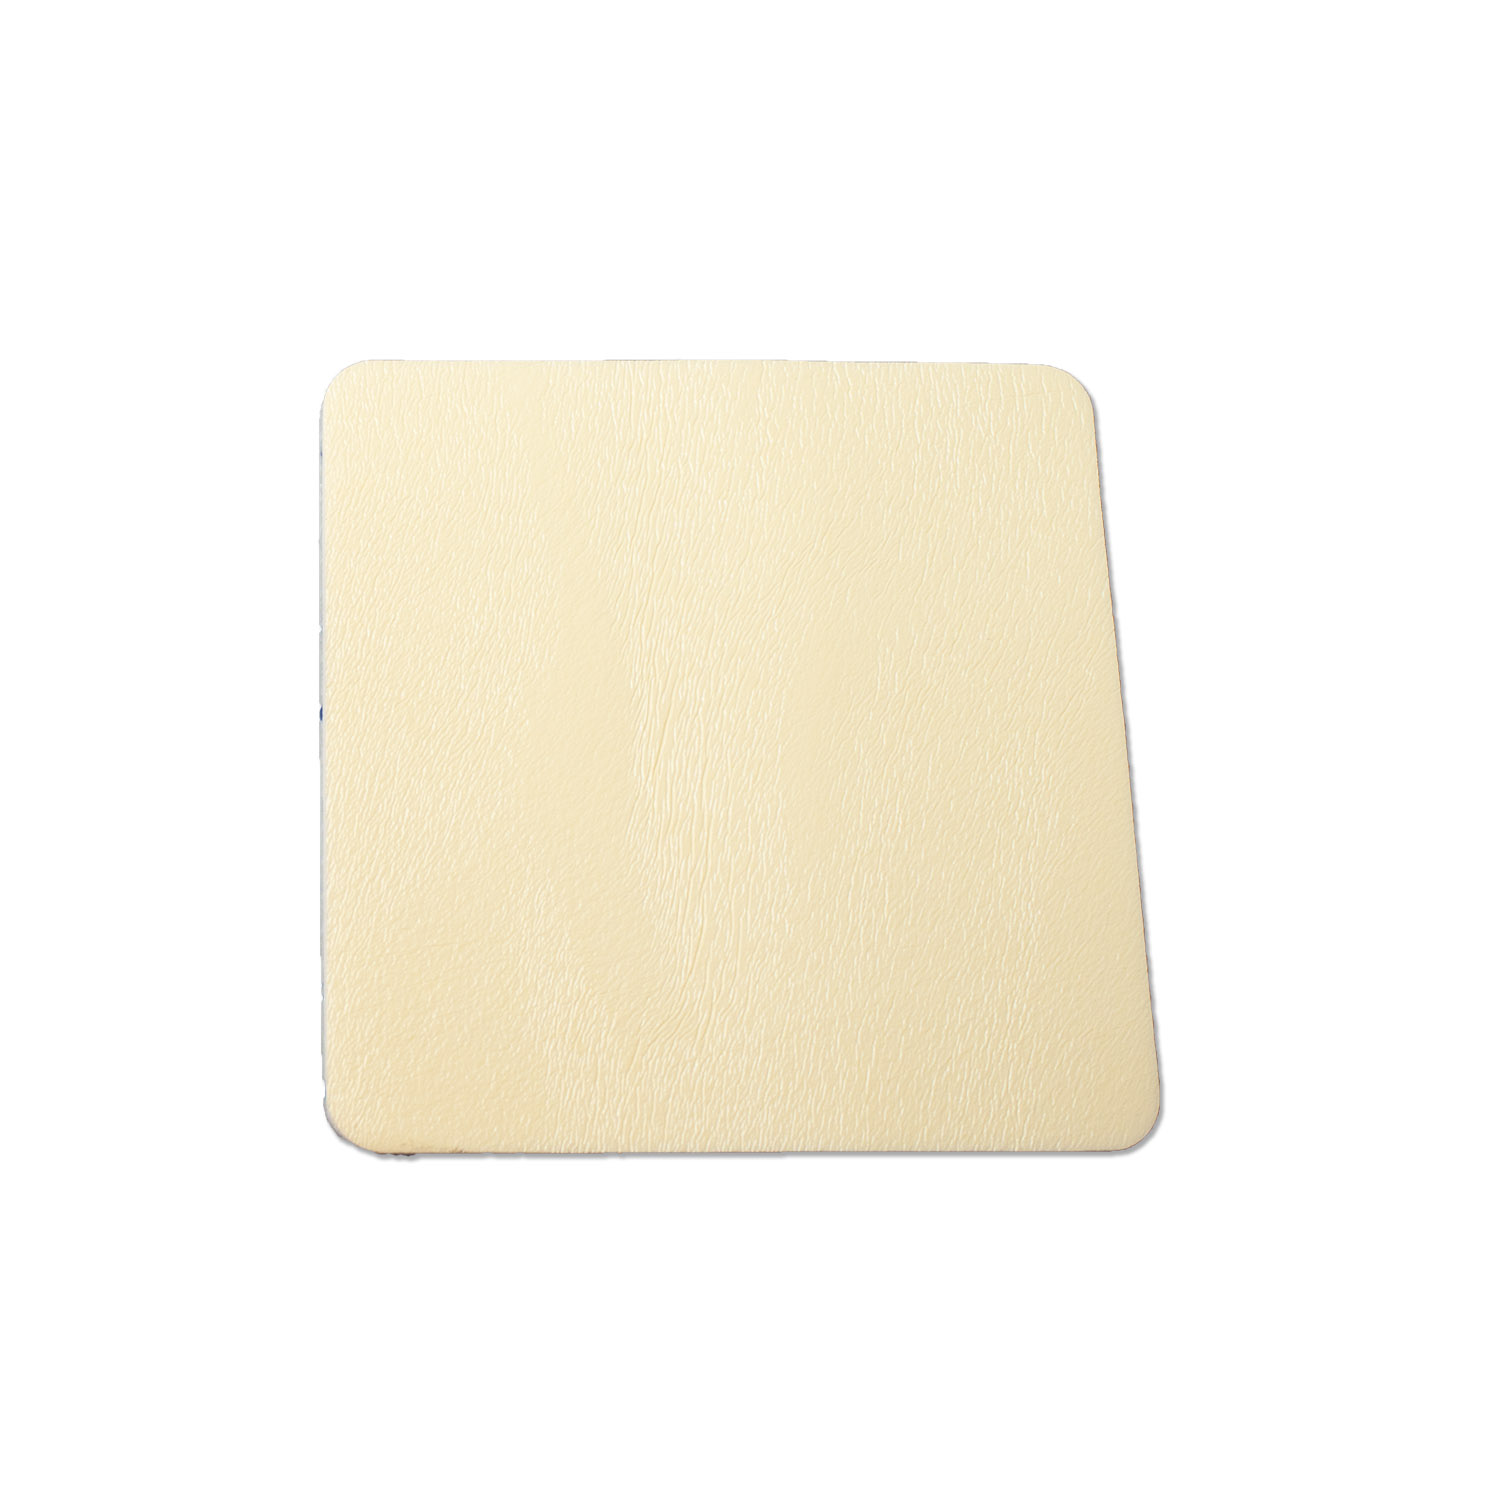 SiliGentle™ Non-Adhesive Silicone Foam Dressings - 6 x 6in